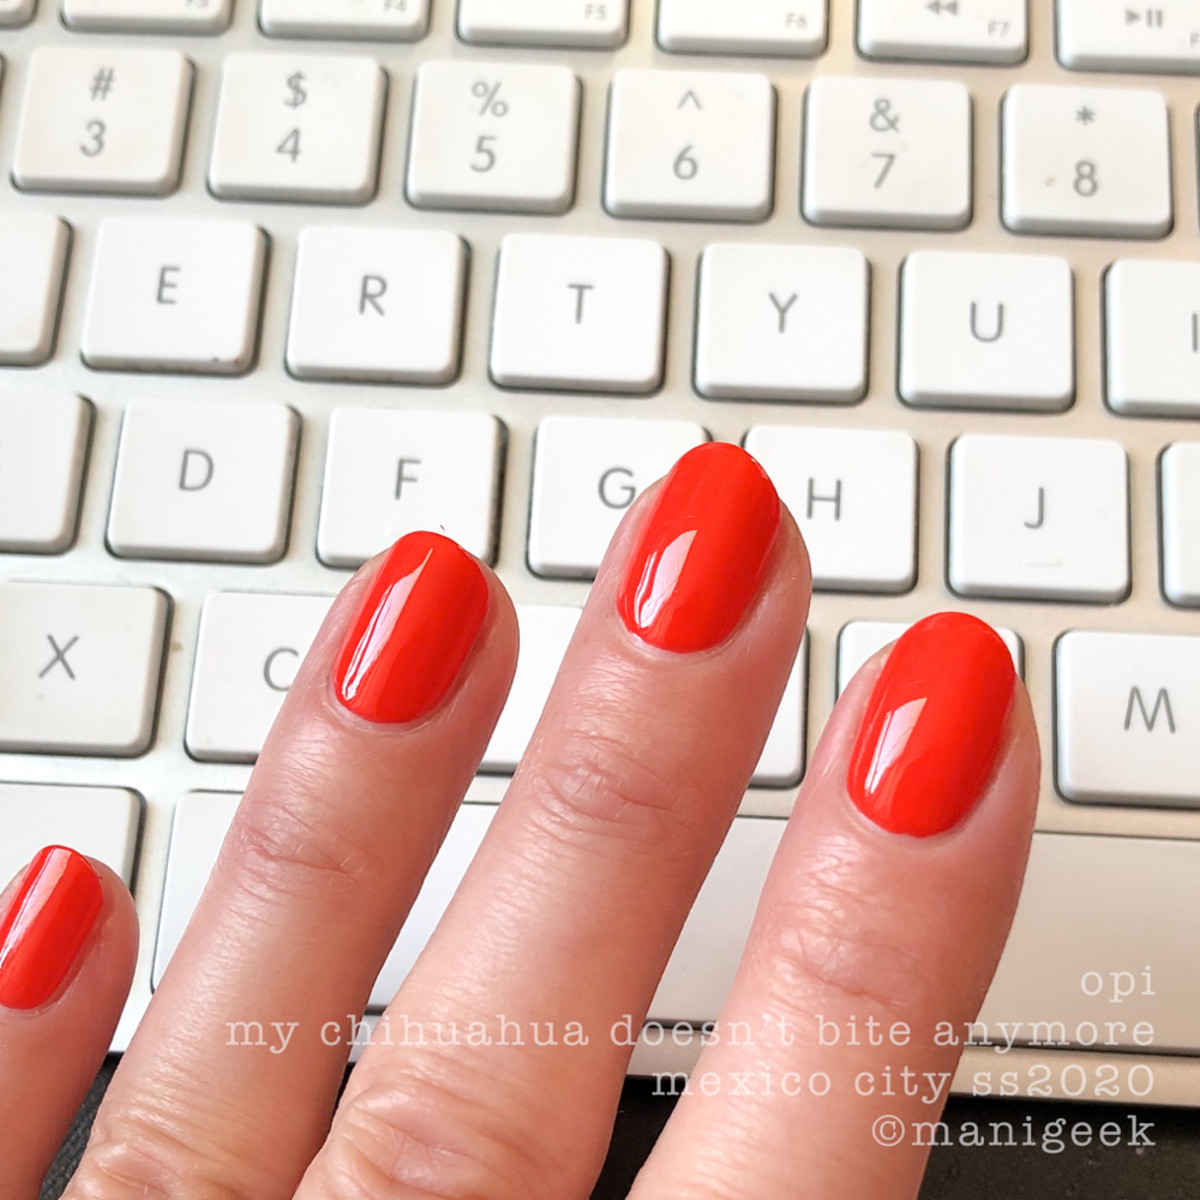 OPI My Chihuahua Doesn't Bite Anymore - OPI Mexico City Swatches Review 2020